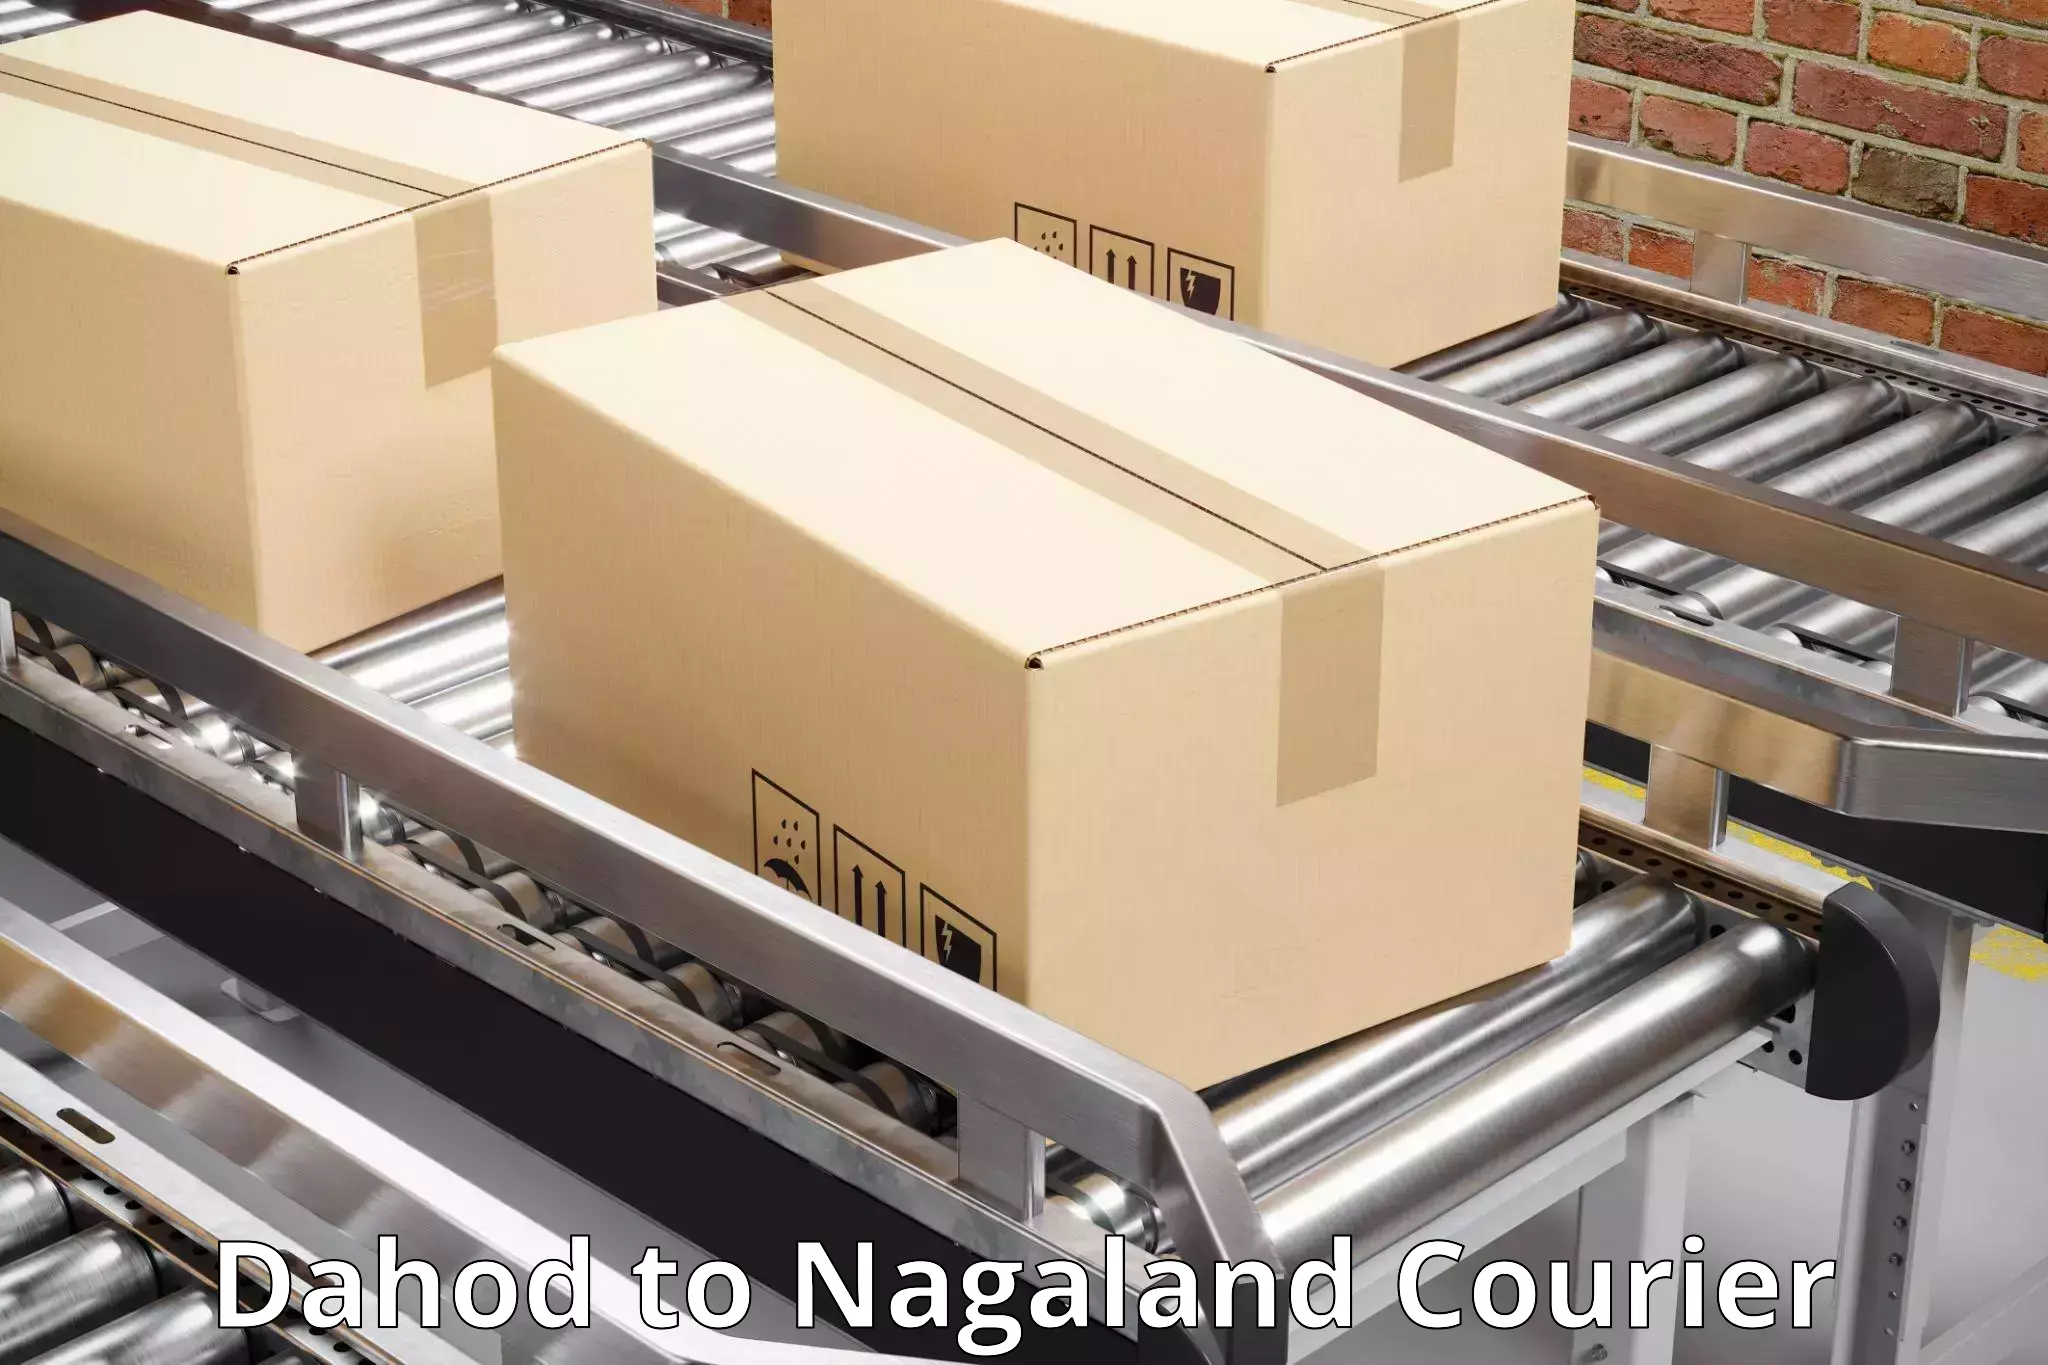 State-of-the-art courier technology Dahod to Nagaland